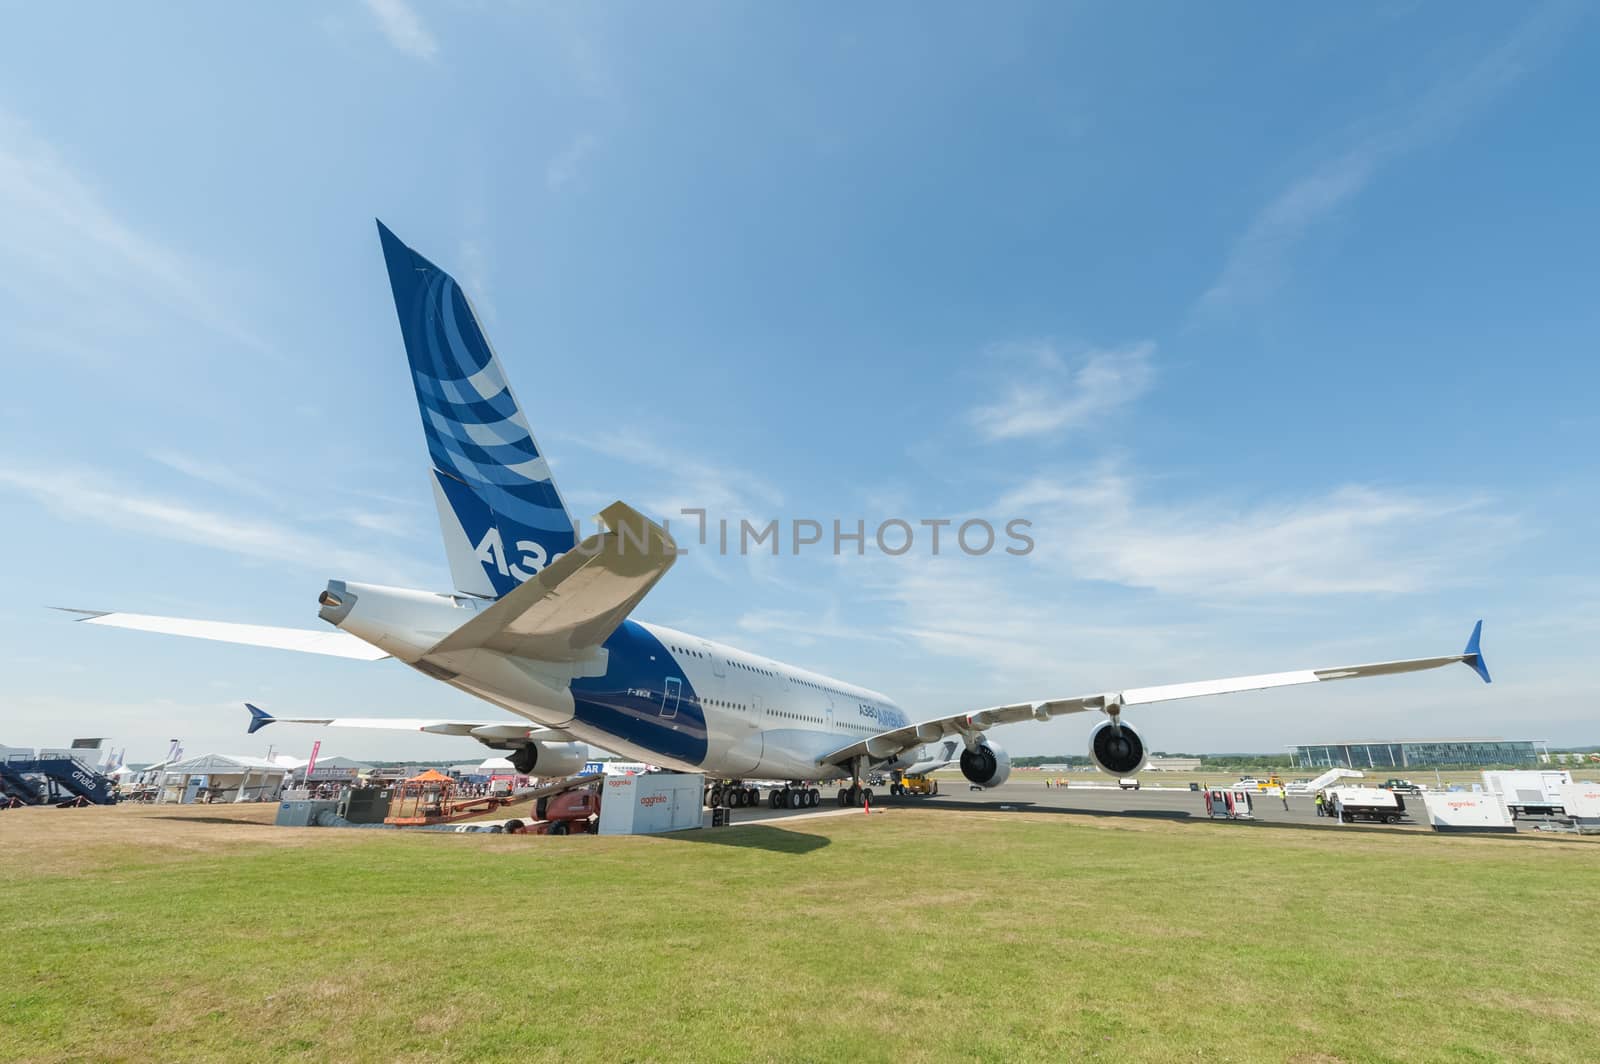 Farnborough, UK - July 18, 2014: Double-decker Airbus A380 jet airliner on static display at the Farnborough airshow, UK